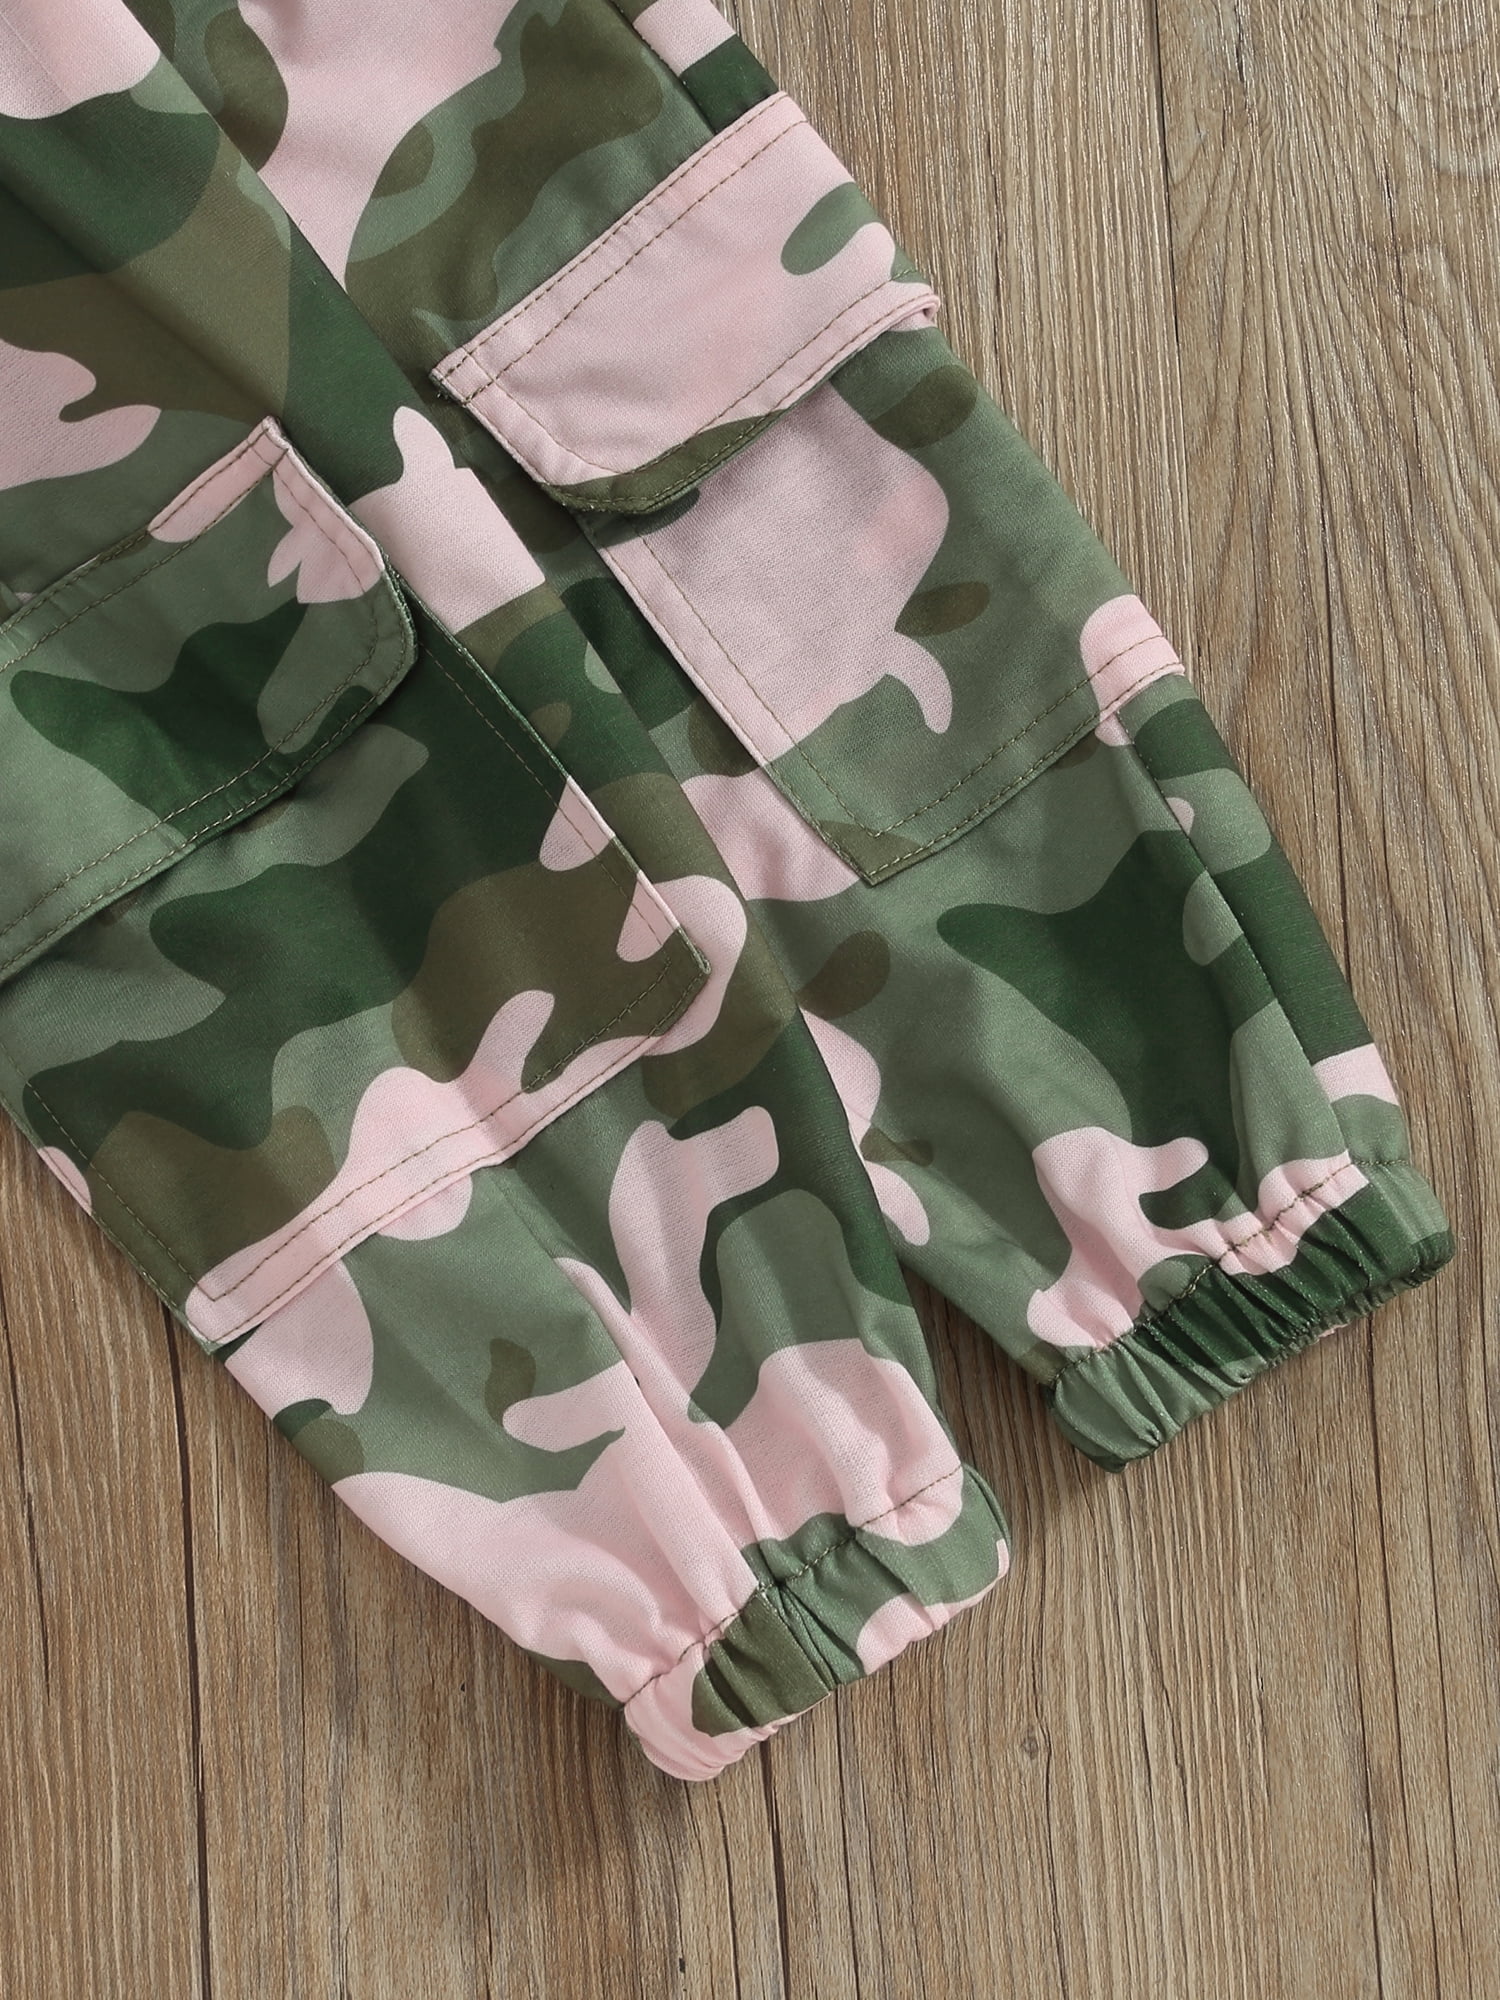 INS Camouflage Plus Size Camouflage Pants For Girls, 4 13 Years Old Casual  Cotton, Printed, Perfect For Spring And Autumn LJ201019 From Jiao08, $14.1  | DHgate.Com